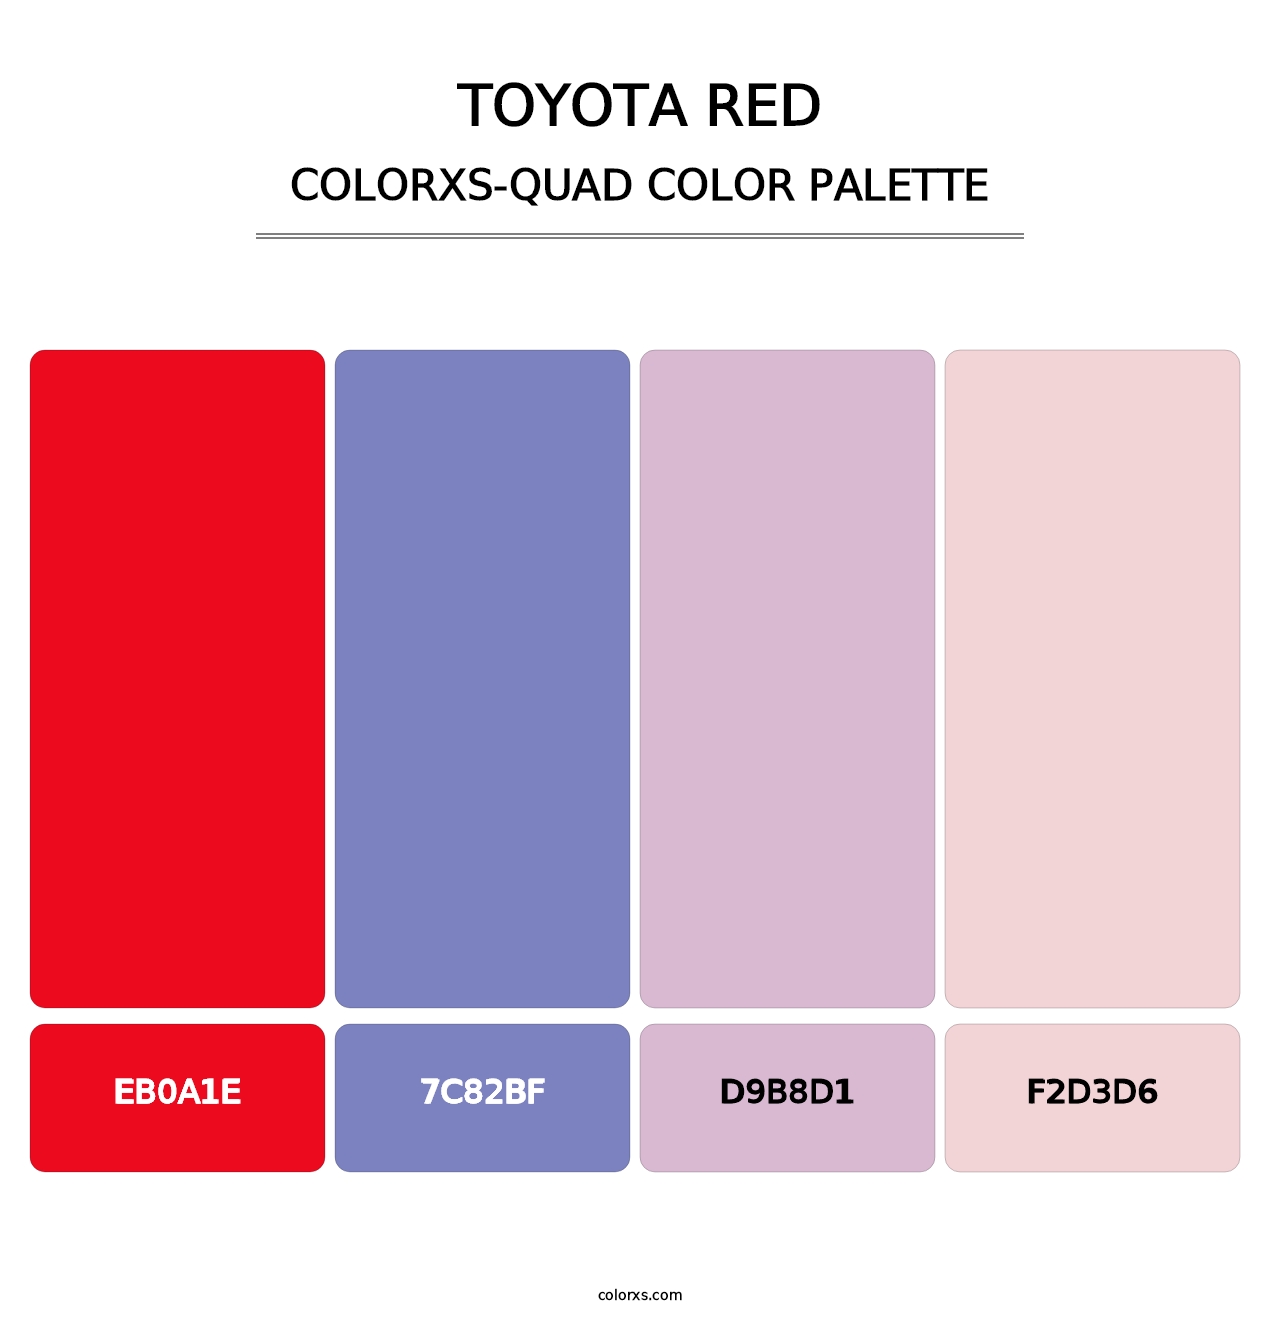 Toyota Red - Colorxs Quad Palette